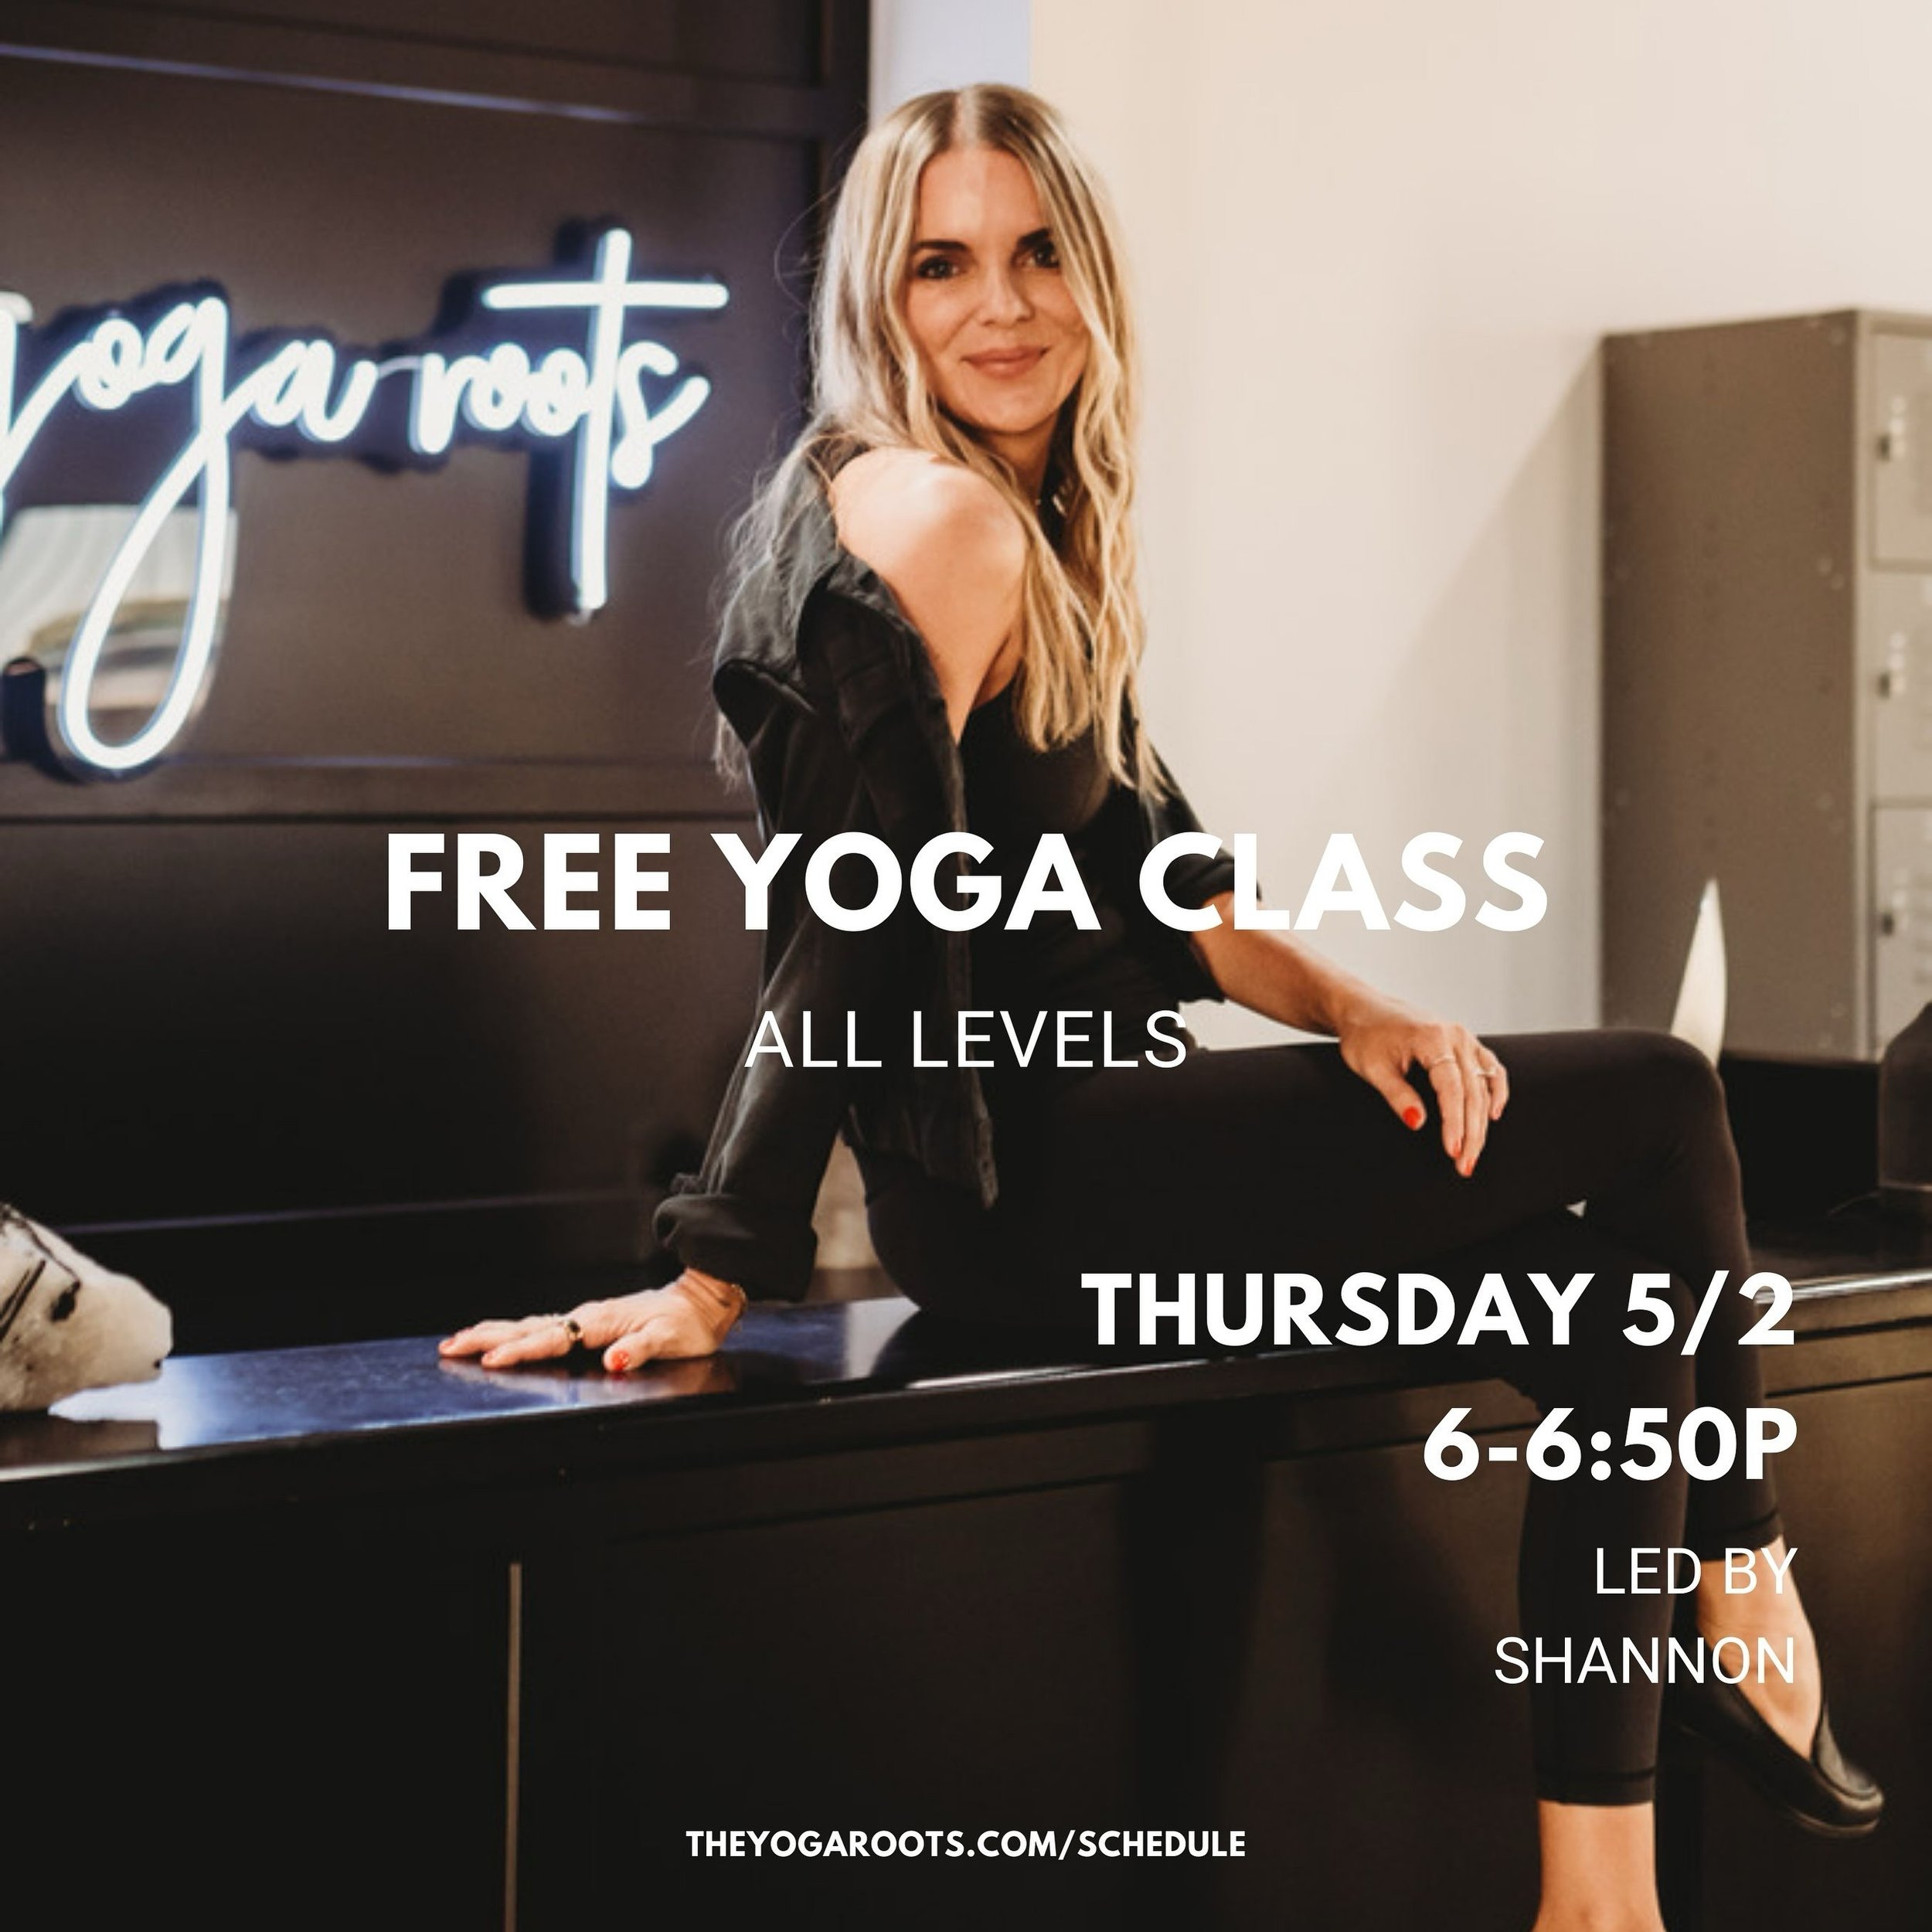 Never been to us and want to try it out? Want to bring all your friends!? We gotchu! Join our owner @shannon.quigley for a FREE yoga class!
Thursday 5/2 6p. 
Guaranteed fun, sweat and a dope playlist. 
Preregistration required since it will sell out!